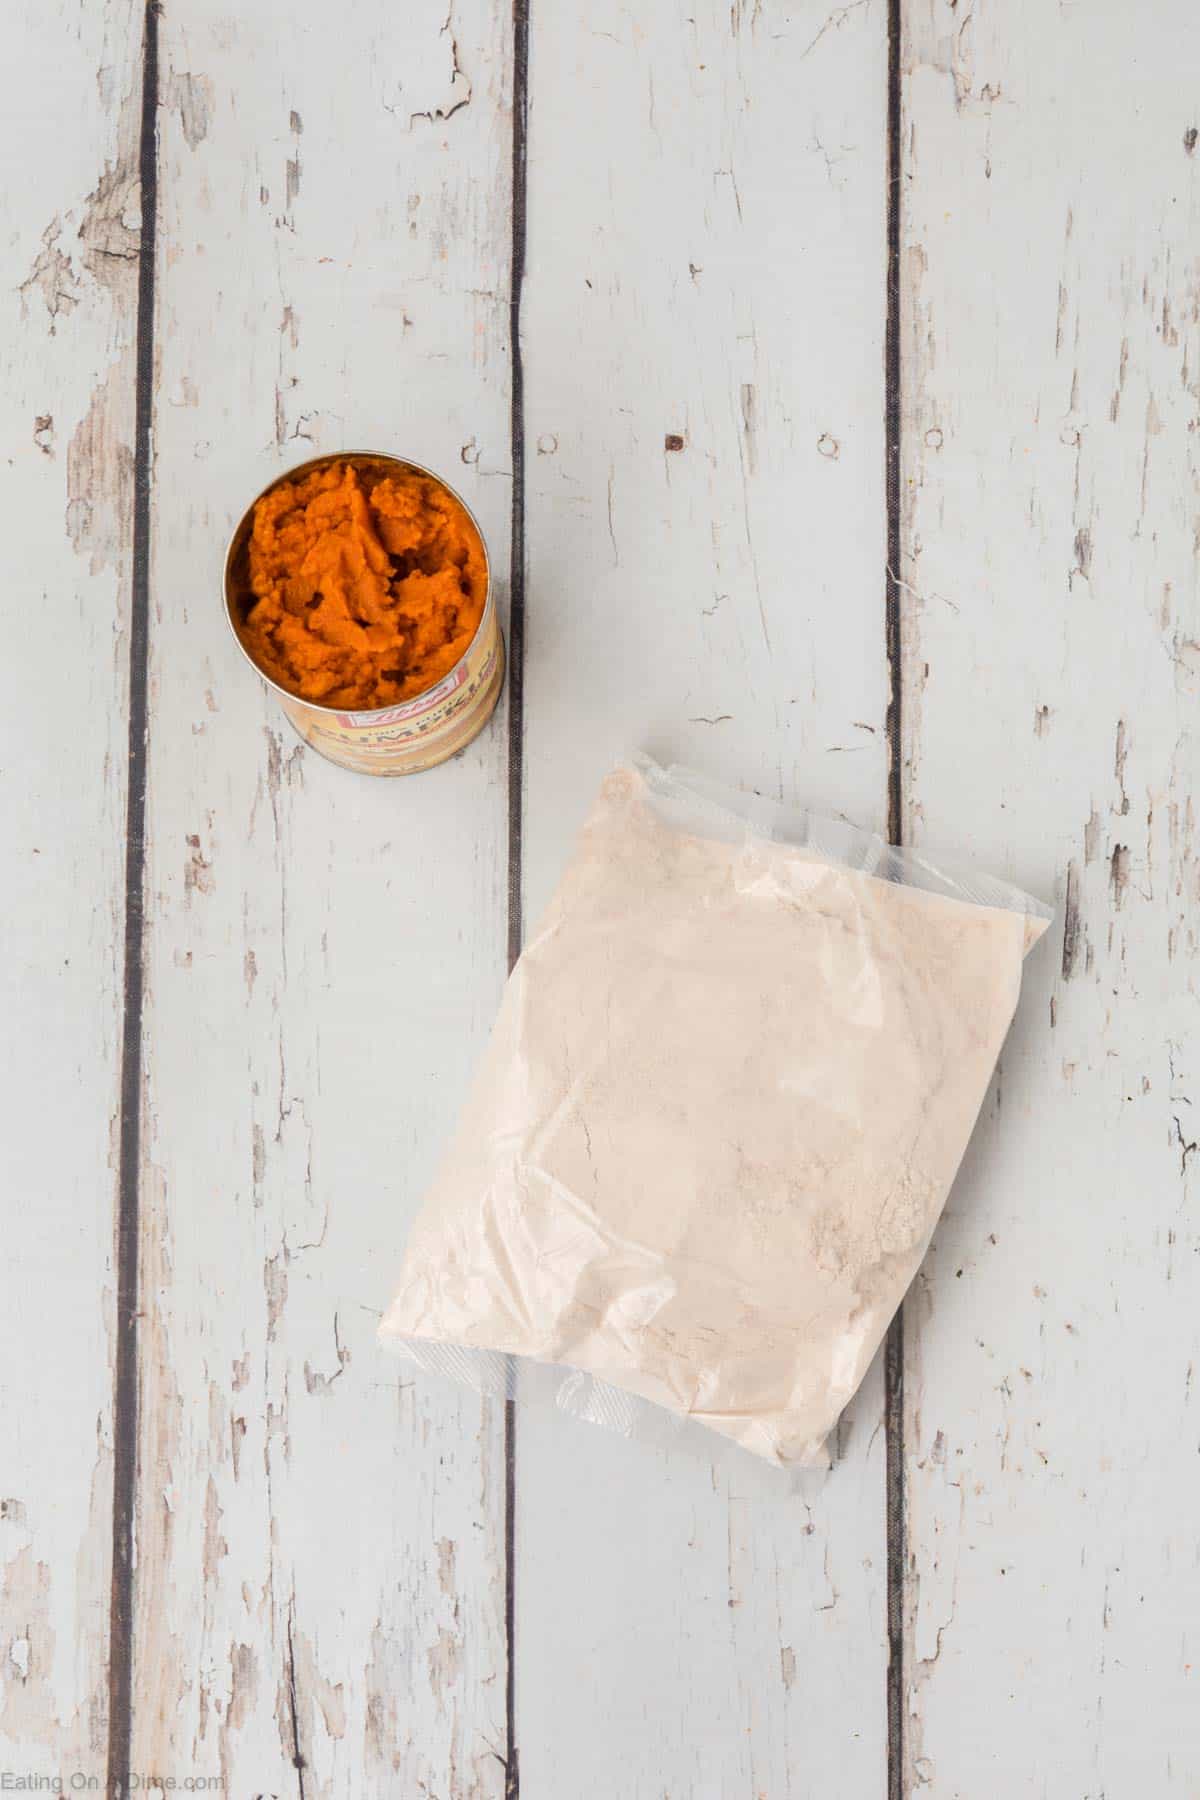 An open can of pumpkin puree and a sealed plastic bag of dry ingredients sit on a rustic wooden surface, hinting at the simplicity of 2 Ingredient Pumpkin Muffins. The dry ingredients appear to be a powder or flour mix, possibly for baking these easy treats.